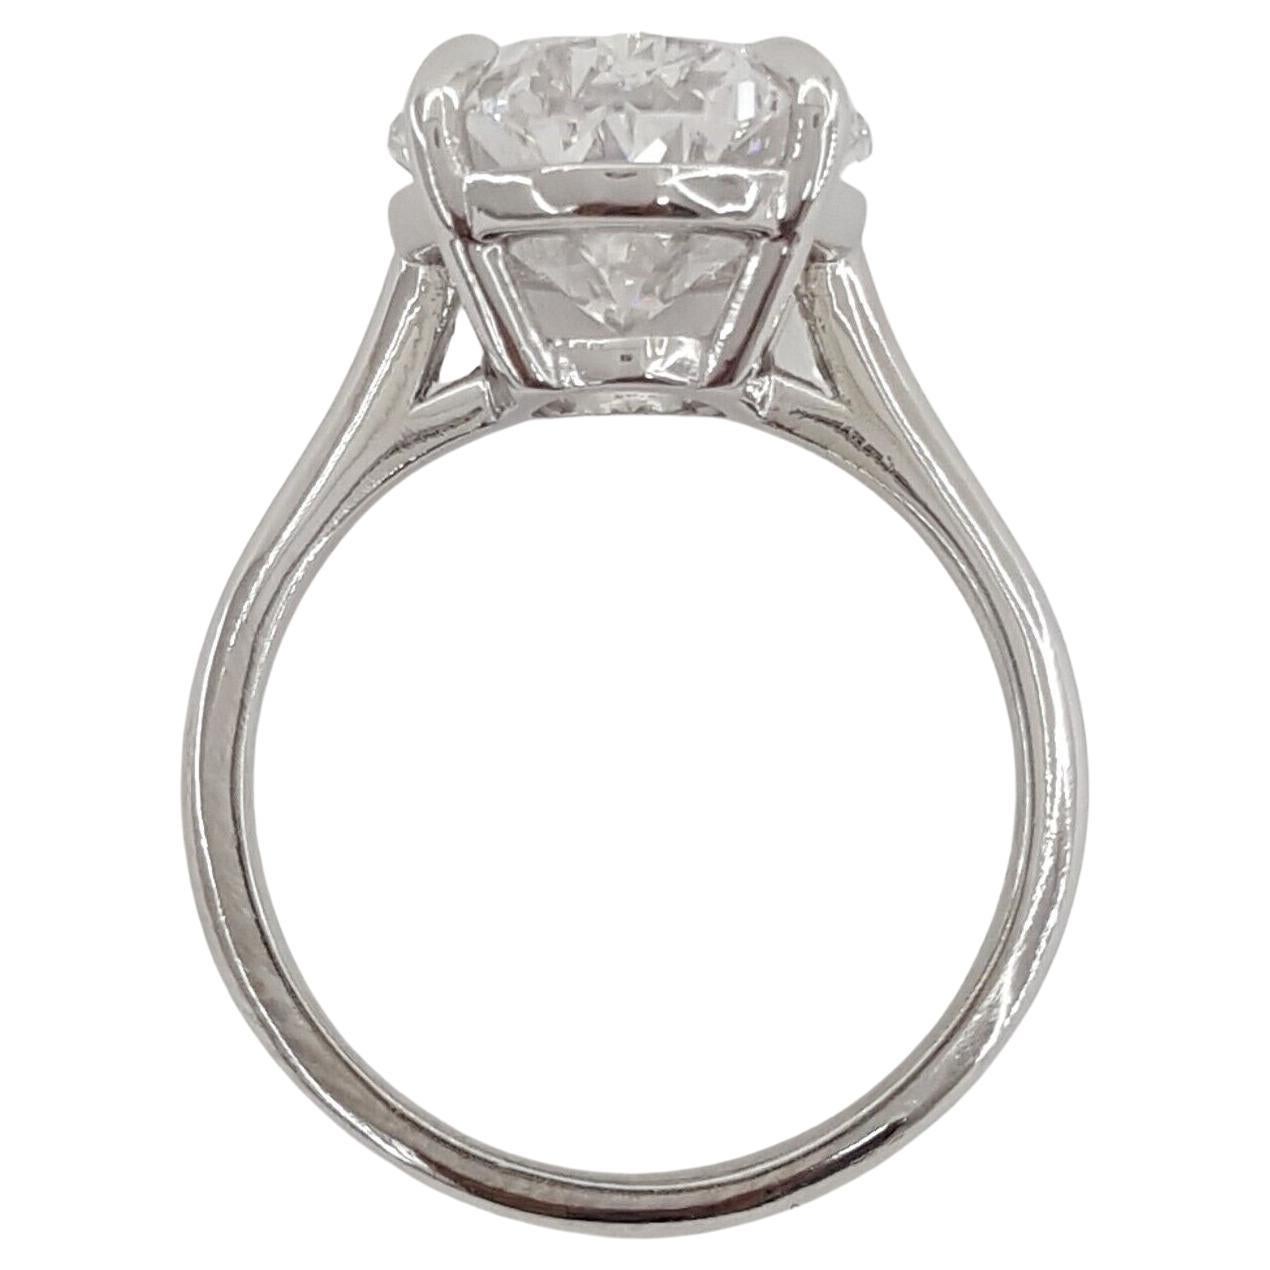 An amazing  This investment grade 6 carat GIA certified oval cut diamond ring that has D color, flawless clarity and gorgeous, lively brilliance!
Oval cuts are one of the most fashionable and sought after diamond cuts, and its elongated shape is